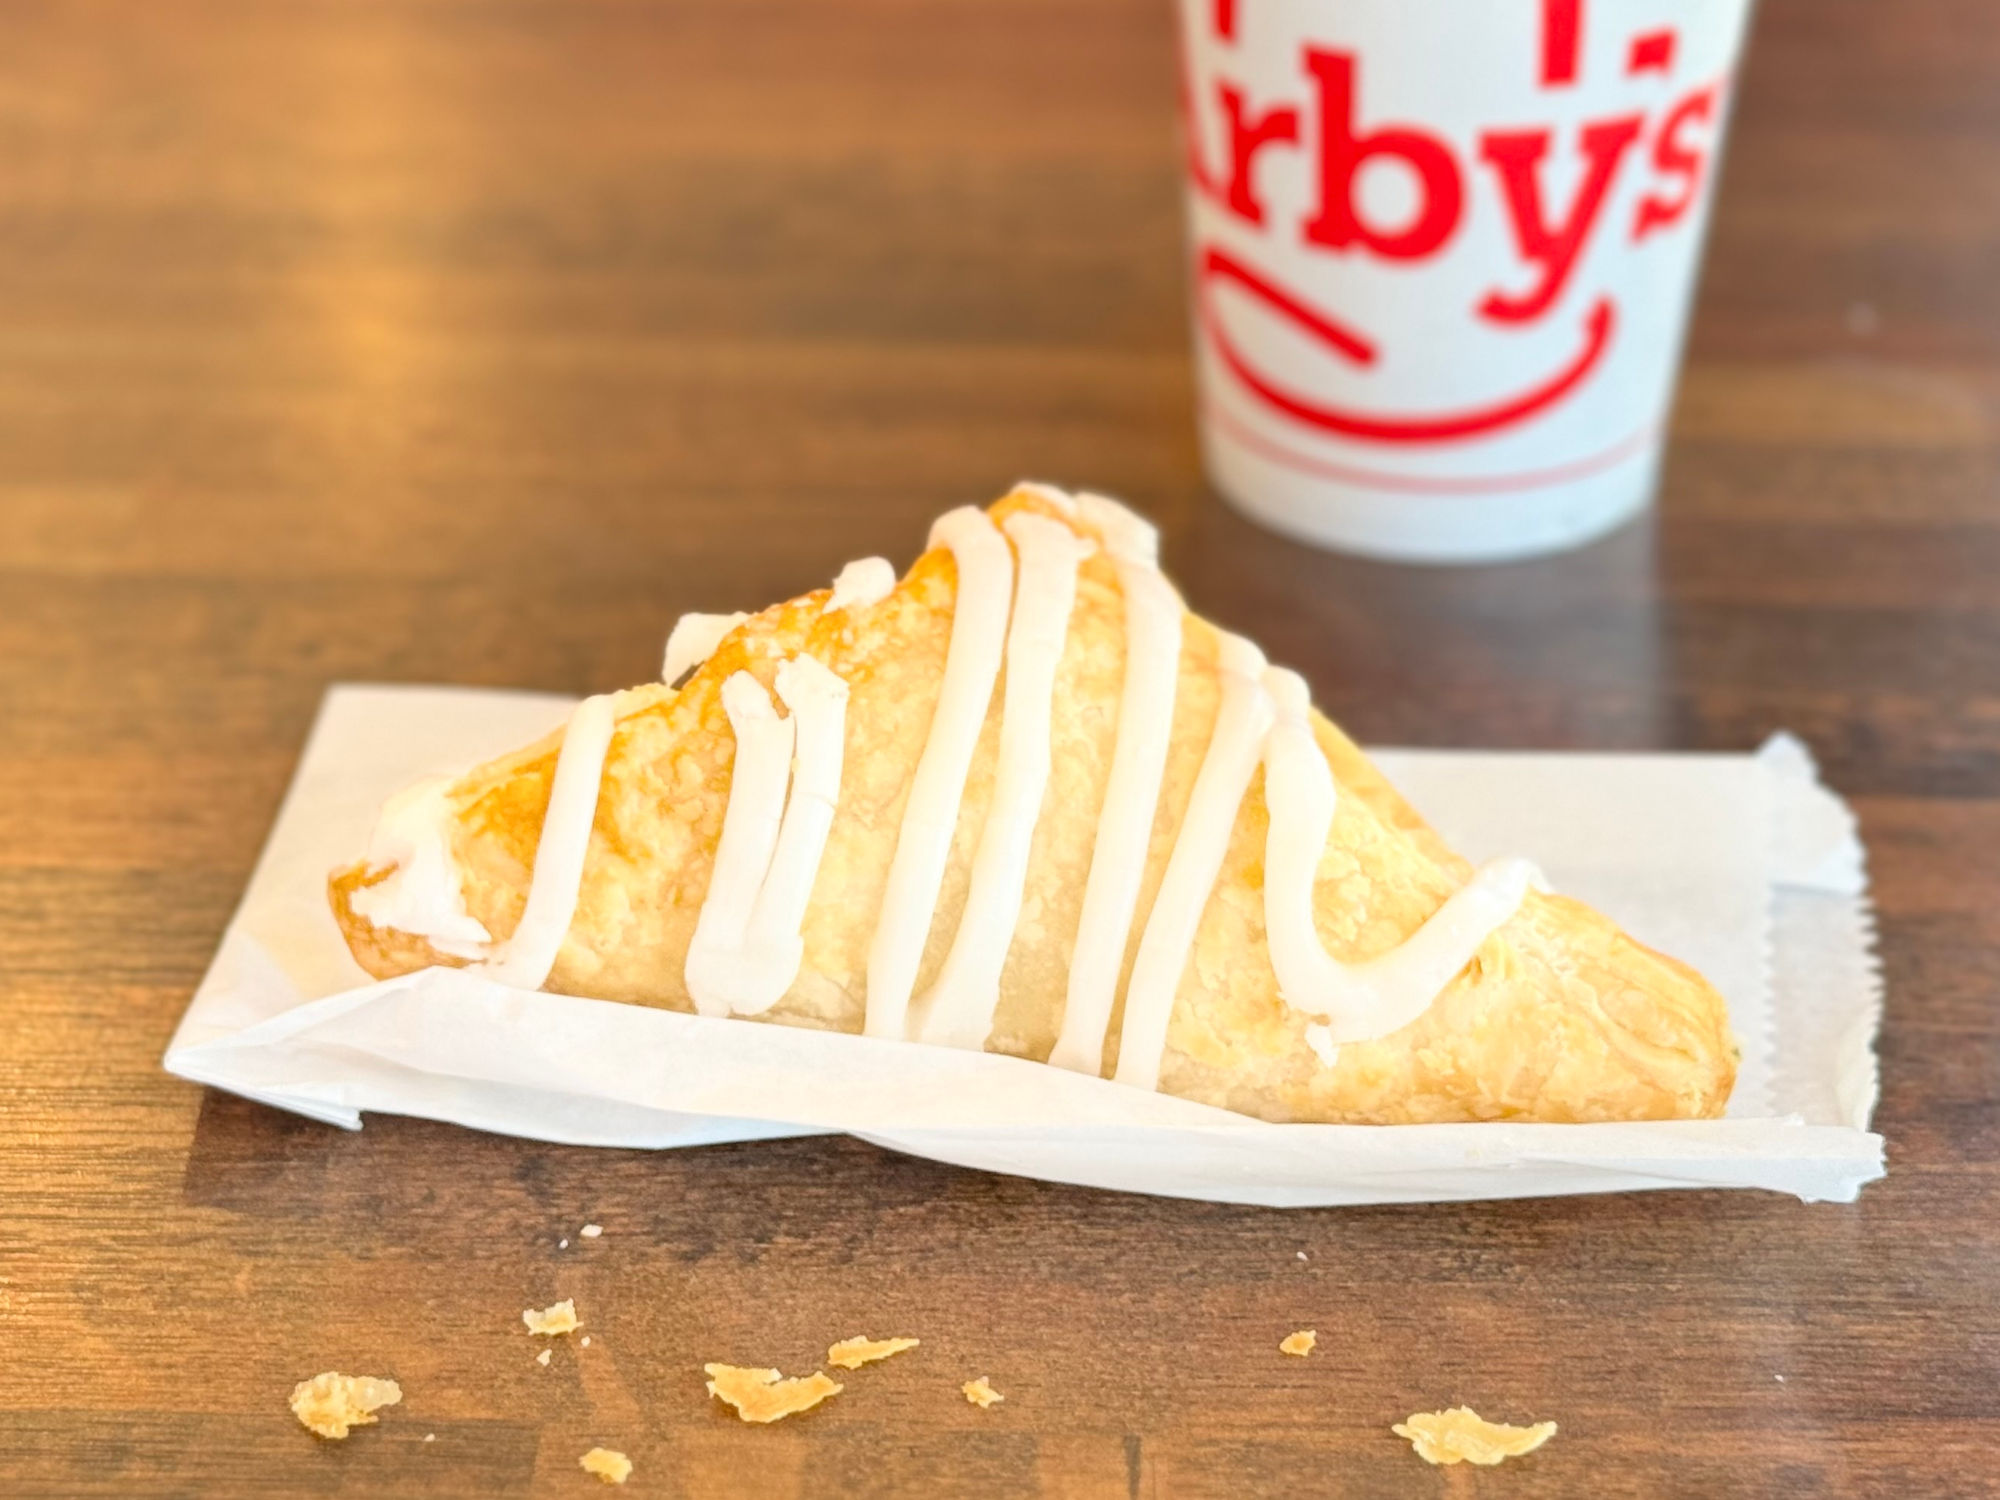 Arby's Apple Turnover